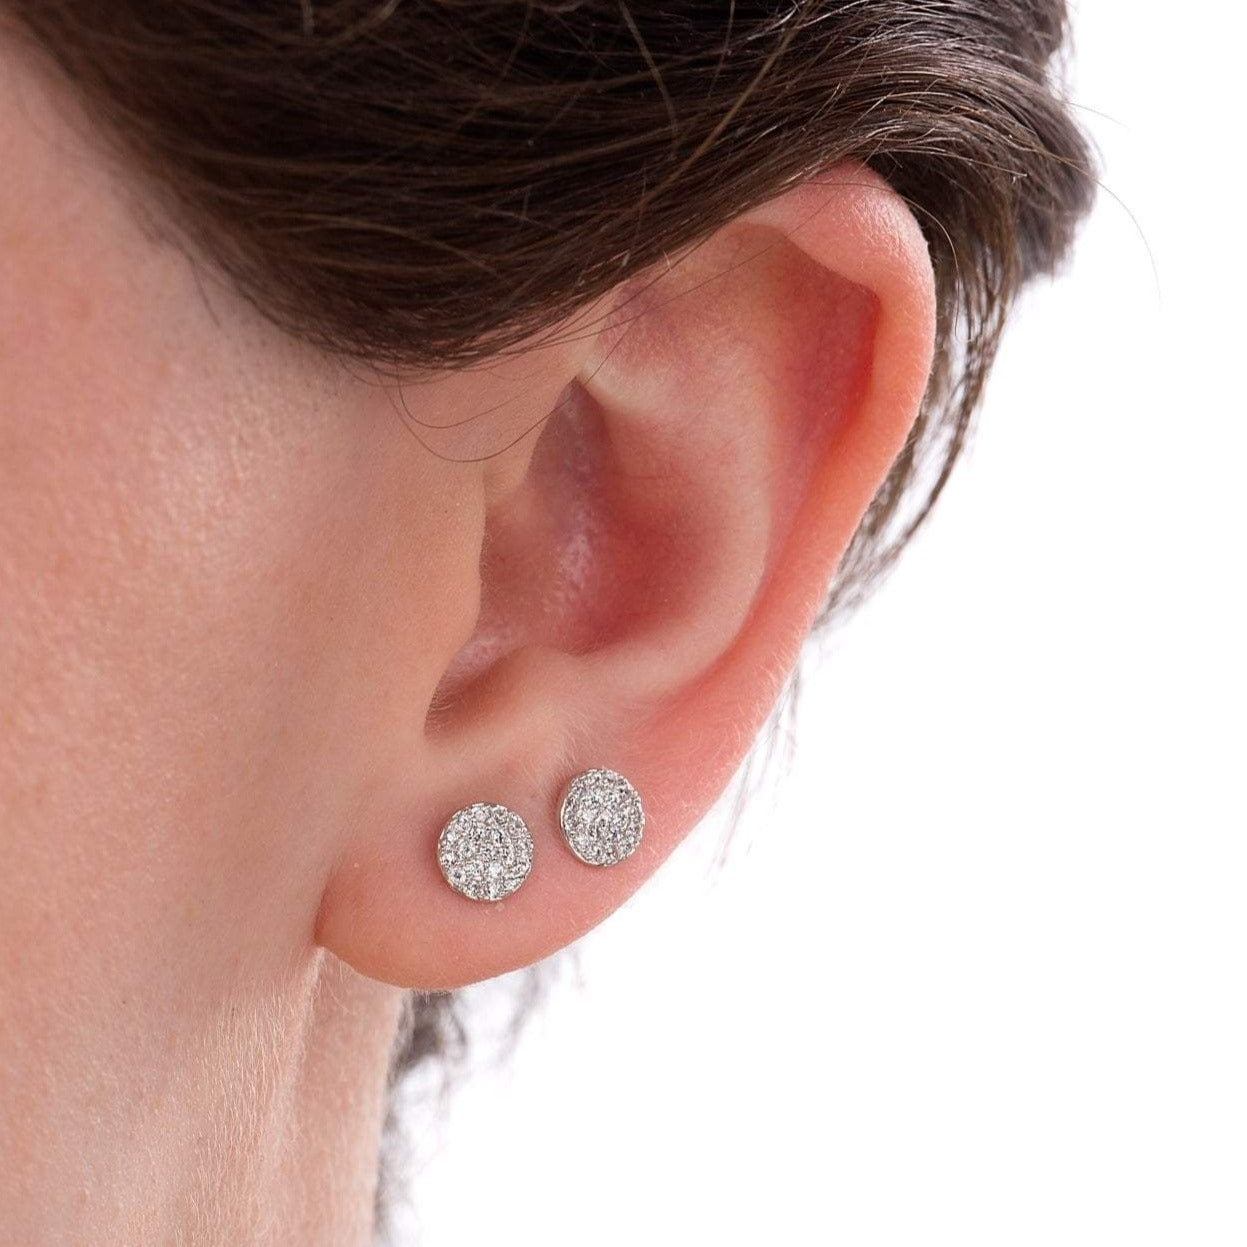  Pave Circle Stud Earrings - by Scream Pretty